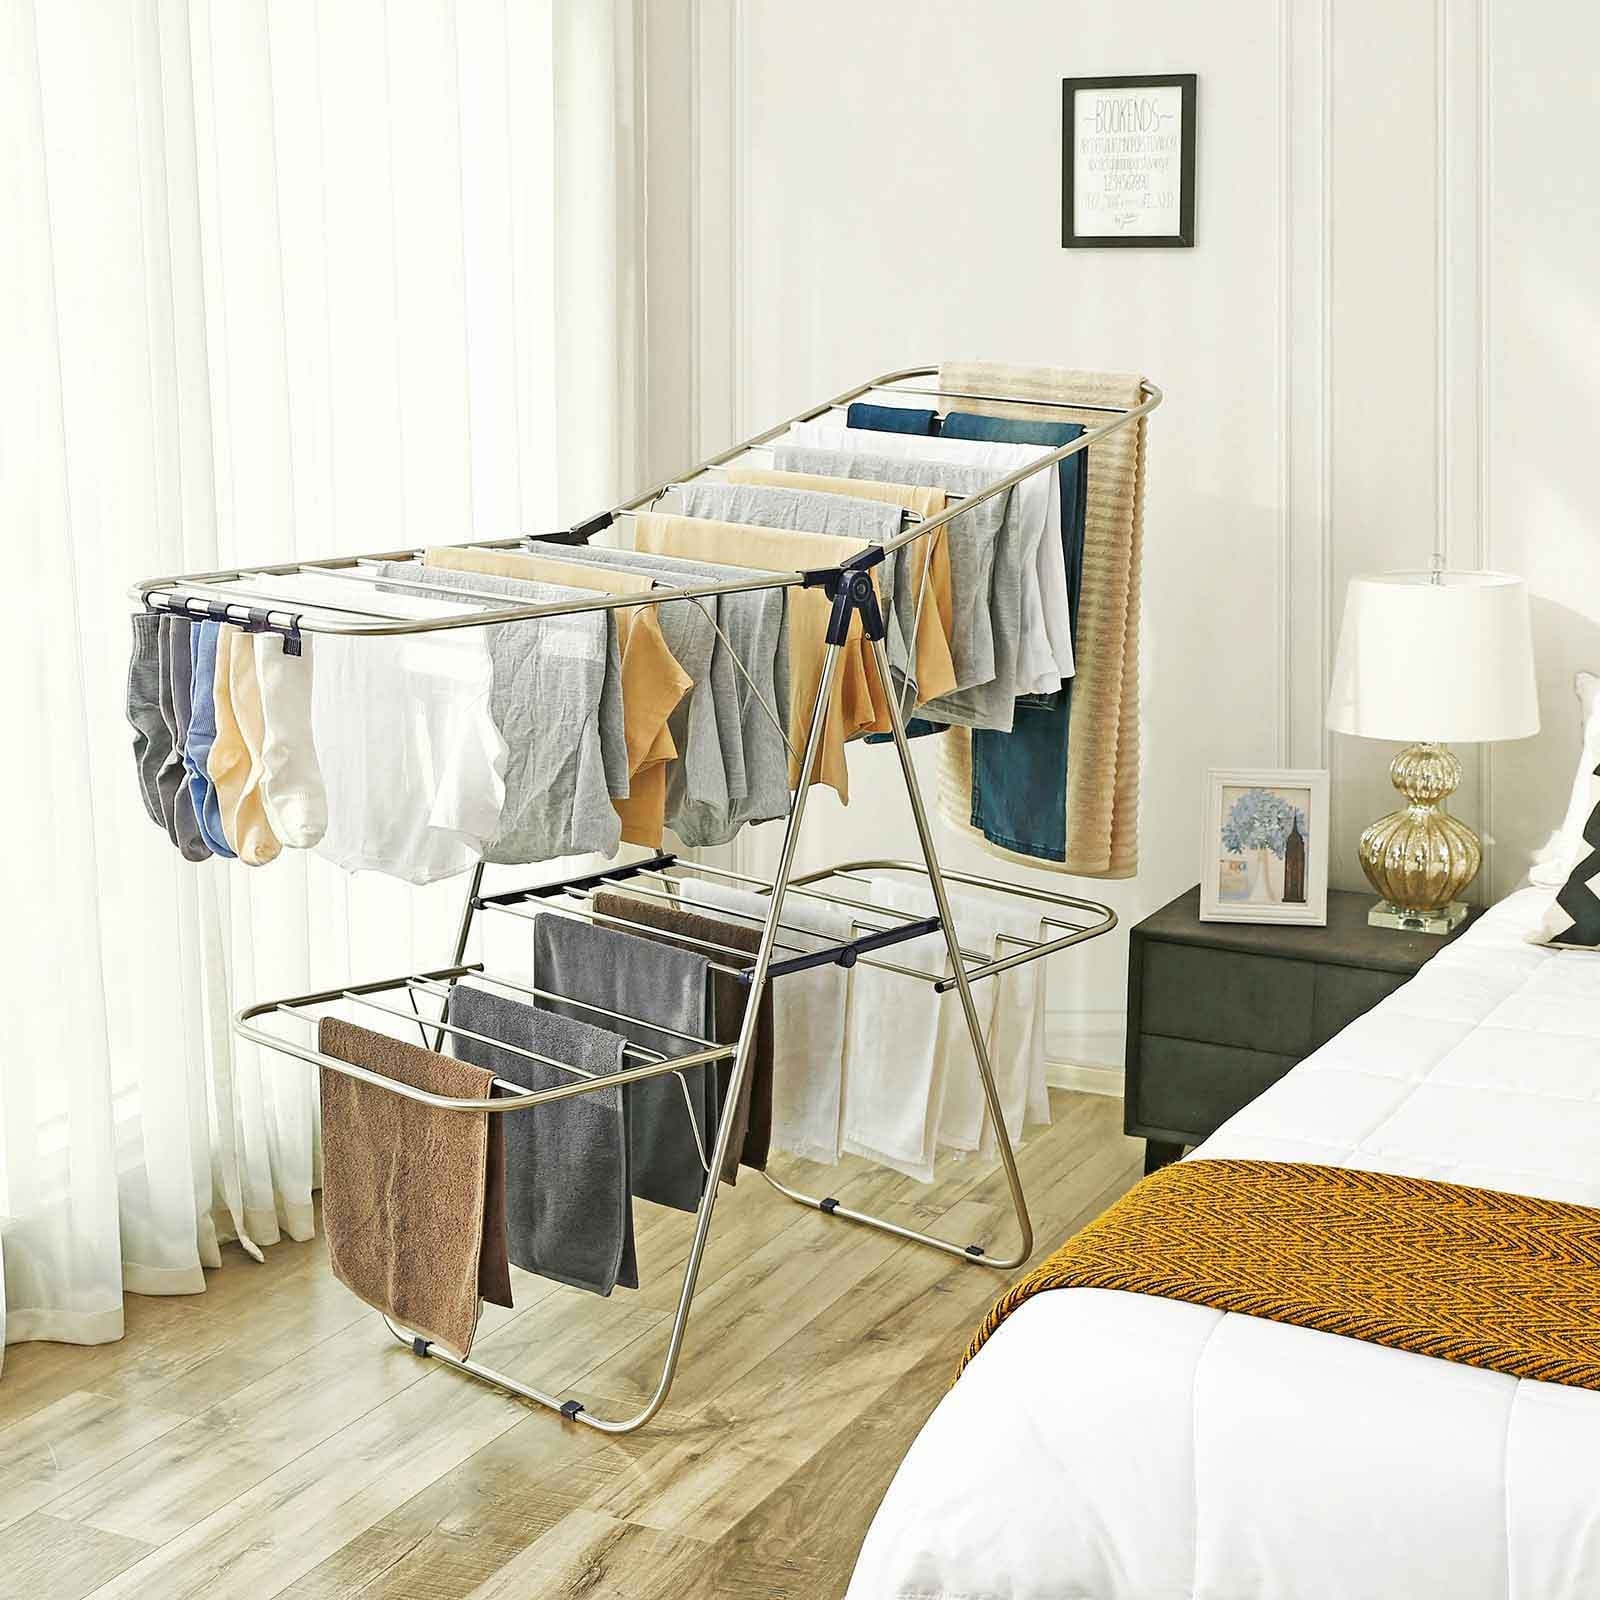 https://ak1.ostkcdn.com/images/products/is/images/direct/8046087374b1ceaa2a7b535bde57695b76fc36ee/SONGMICS-2-Level-Clothes-Drying-Rack%2C-Stainless-Steel-Laundry-Rack-with-Height-Adjustable-Wings%2C-Free-Standing-Laundry-Stand.jpg